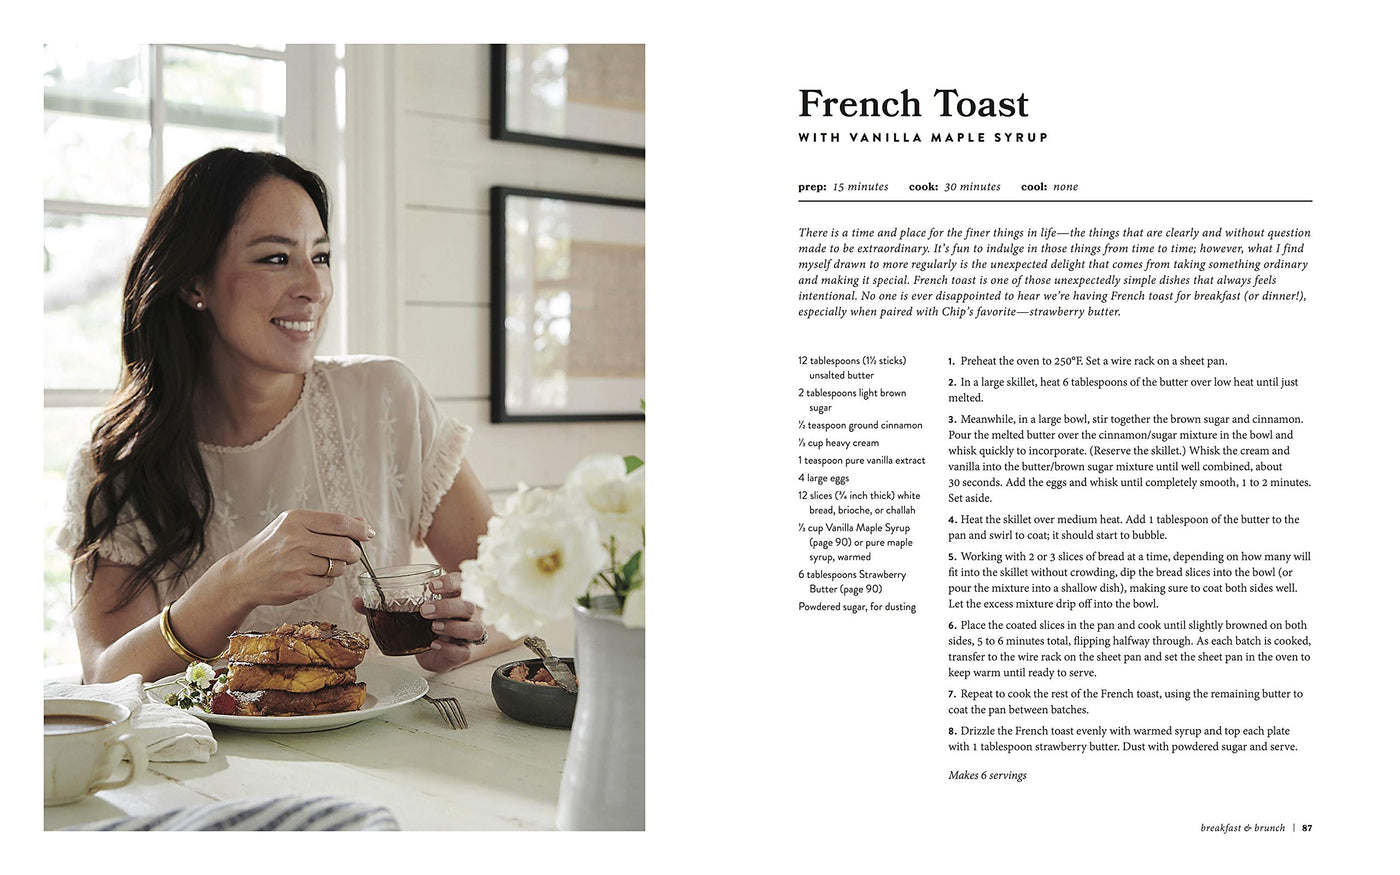 Magnolia Table, Volume 2: A Collection of Recipes for Gathering - Page with French Toast recipe